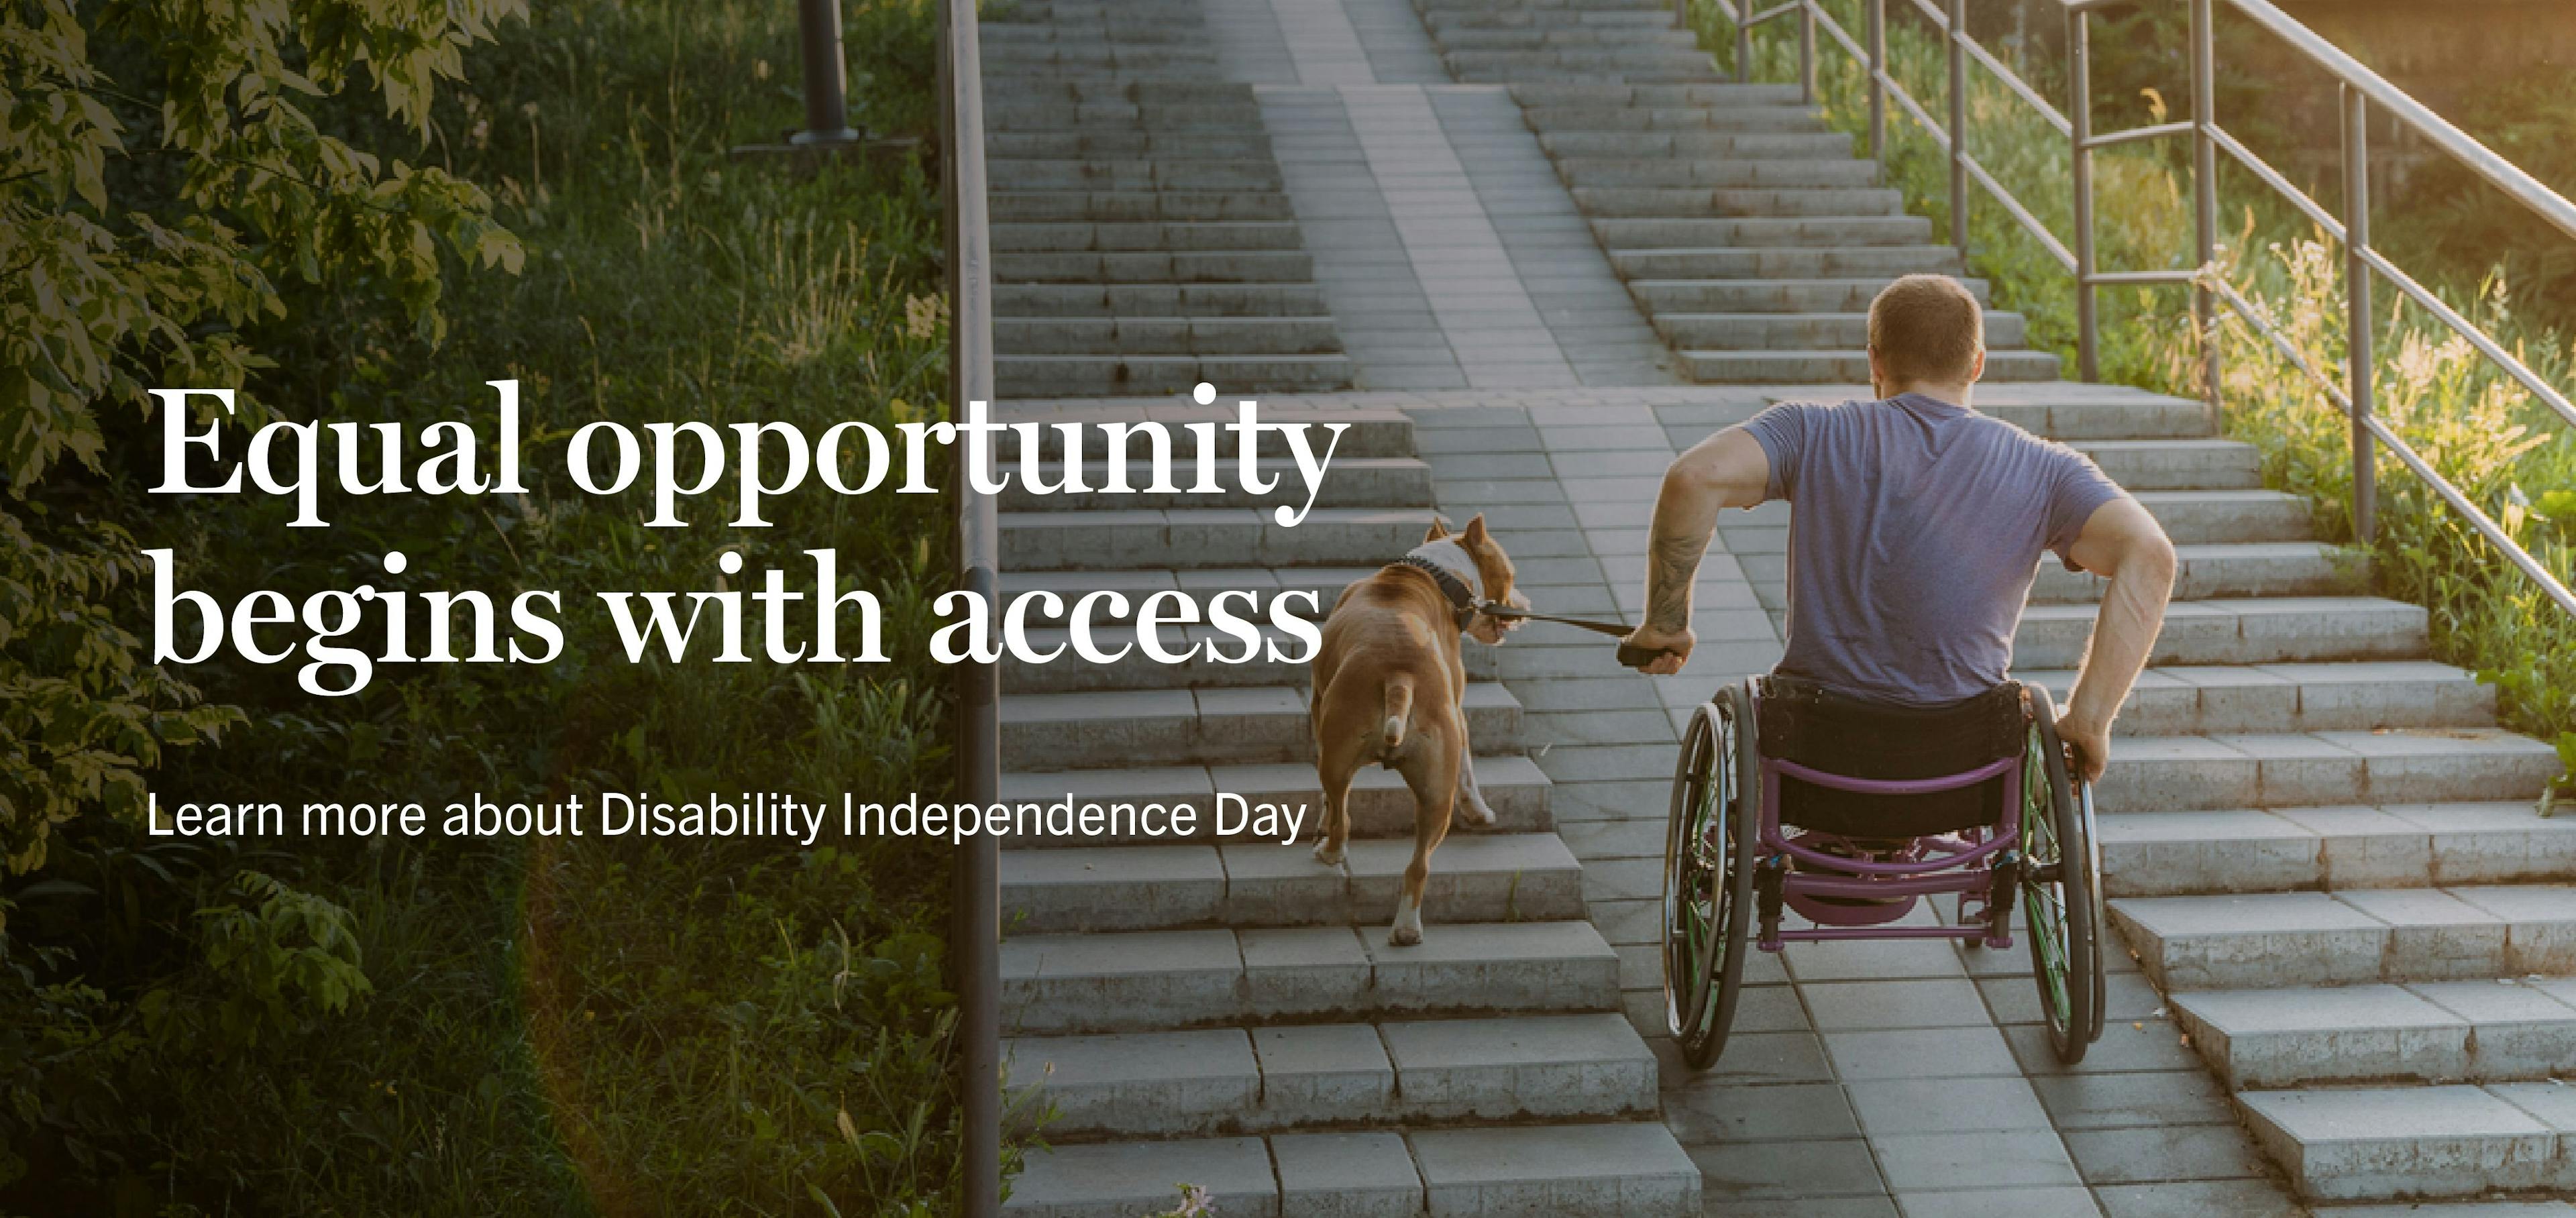 Man in wheelchair with dog going up a ramp with headline: Equal opportunity begins with access 